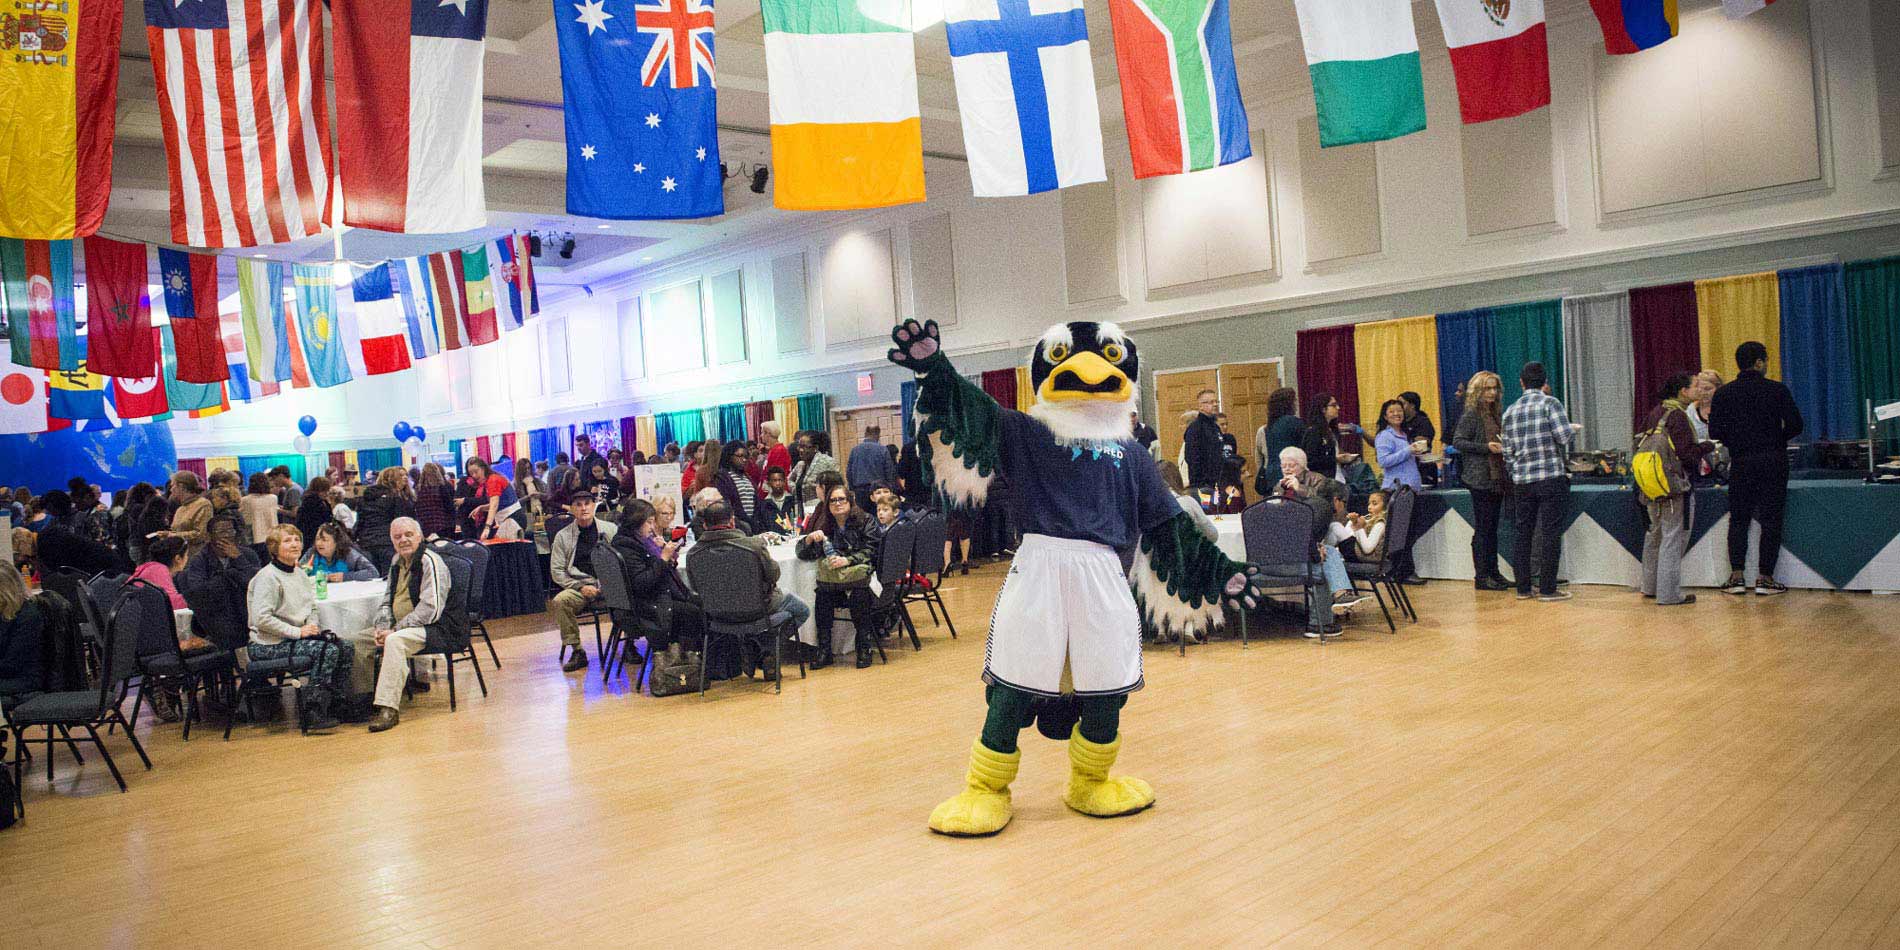 Sammy Seahawk the mascot standing in a crowd waving his hand